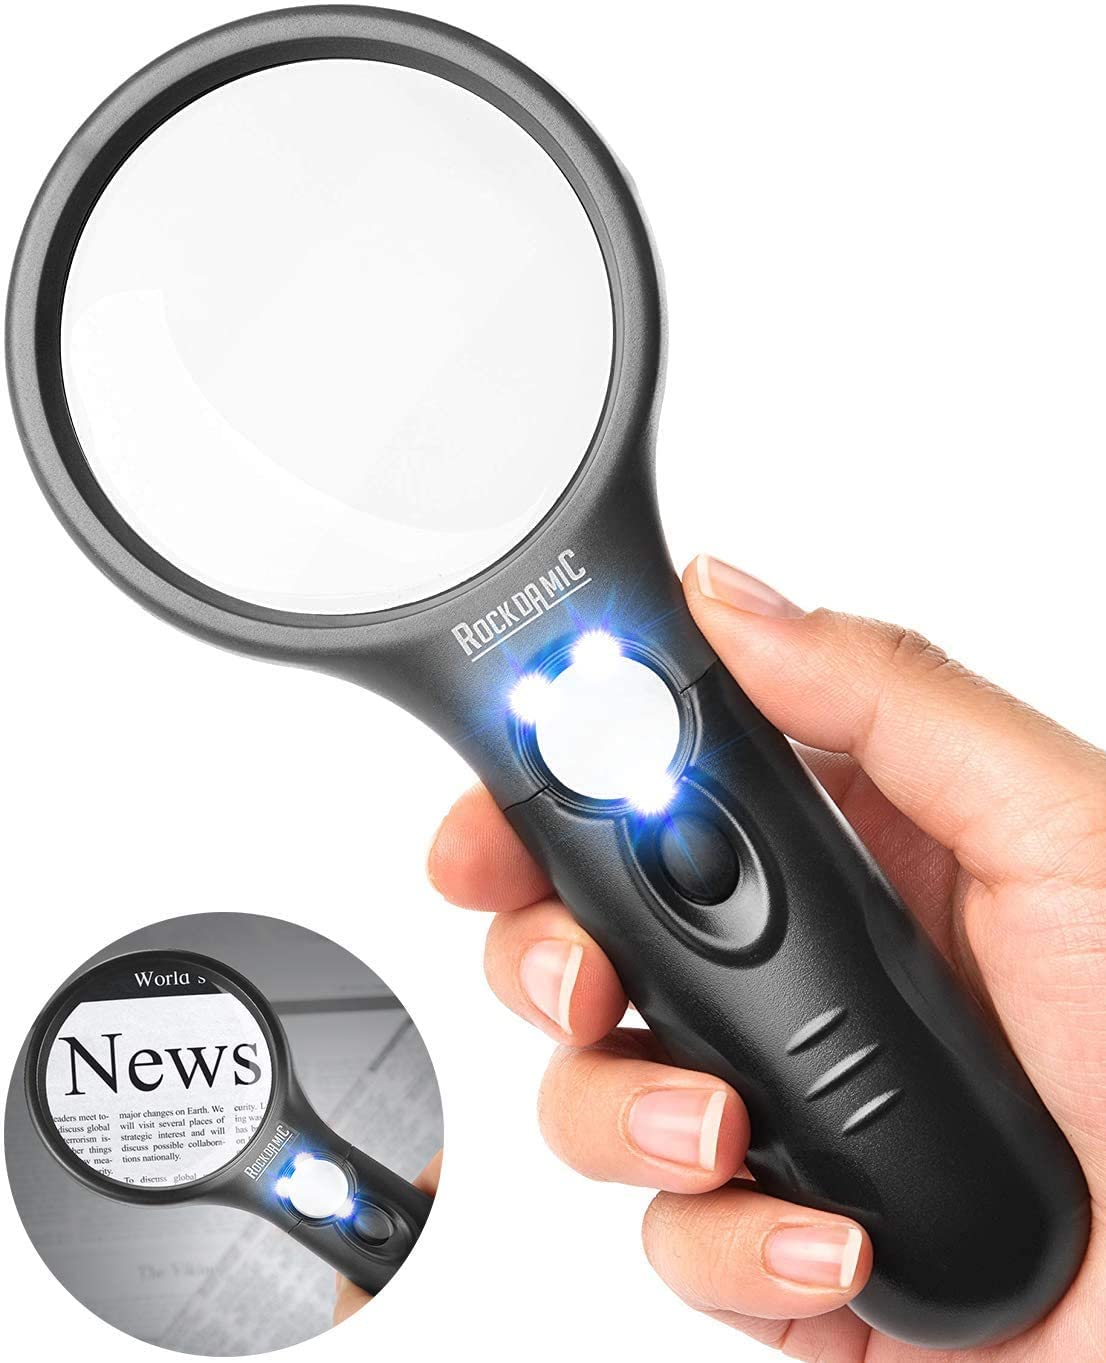 RockDaMic Professional Magnifying Glass with Light (3X / 45x